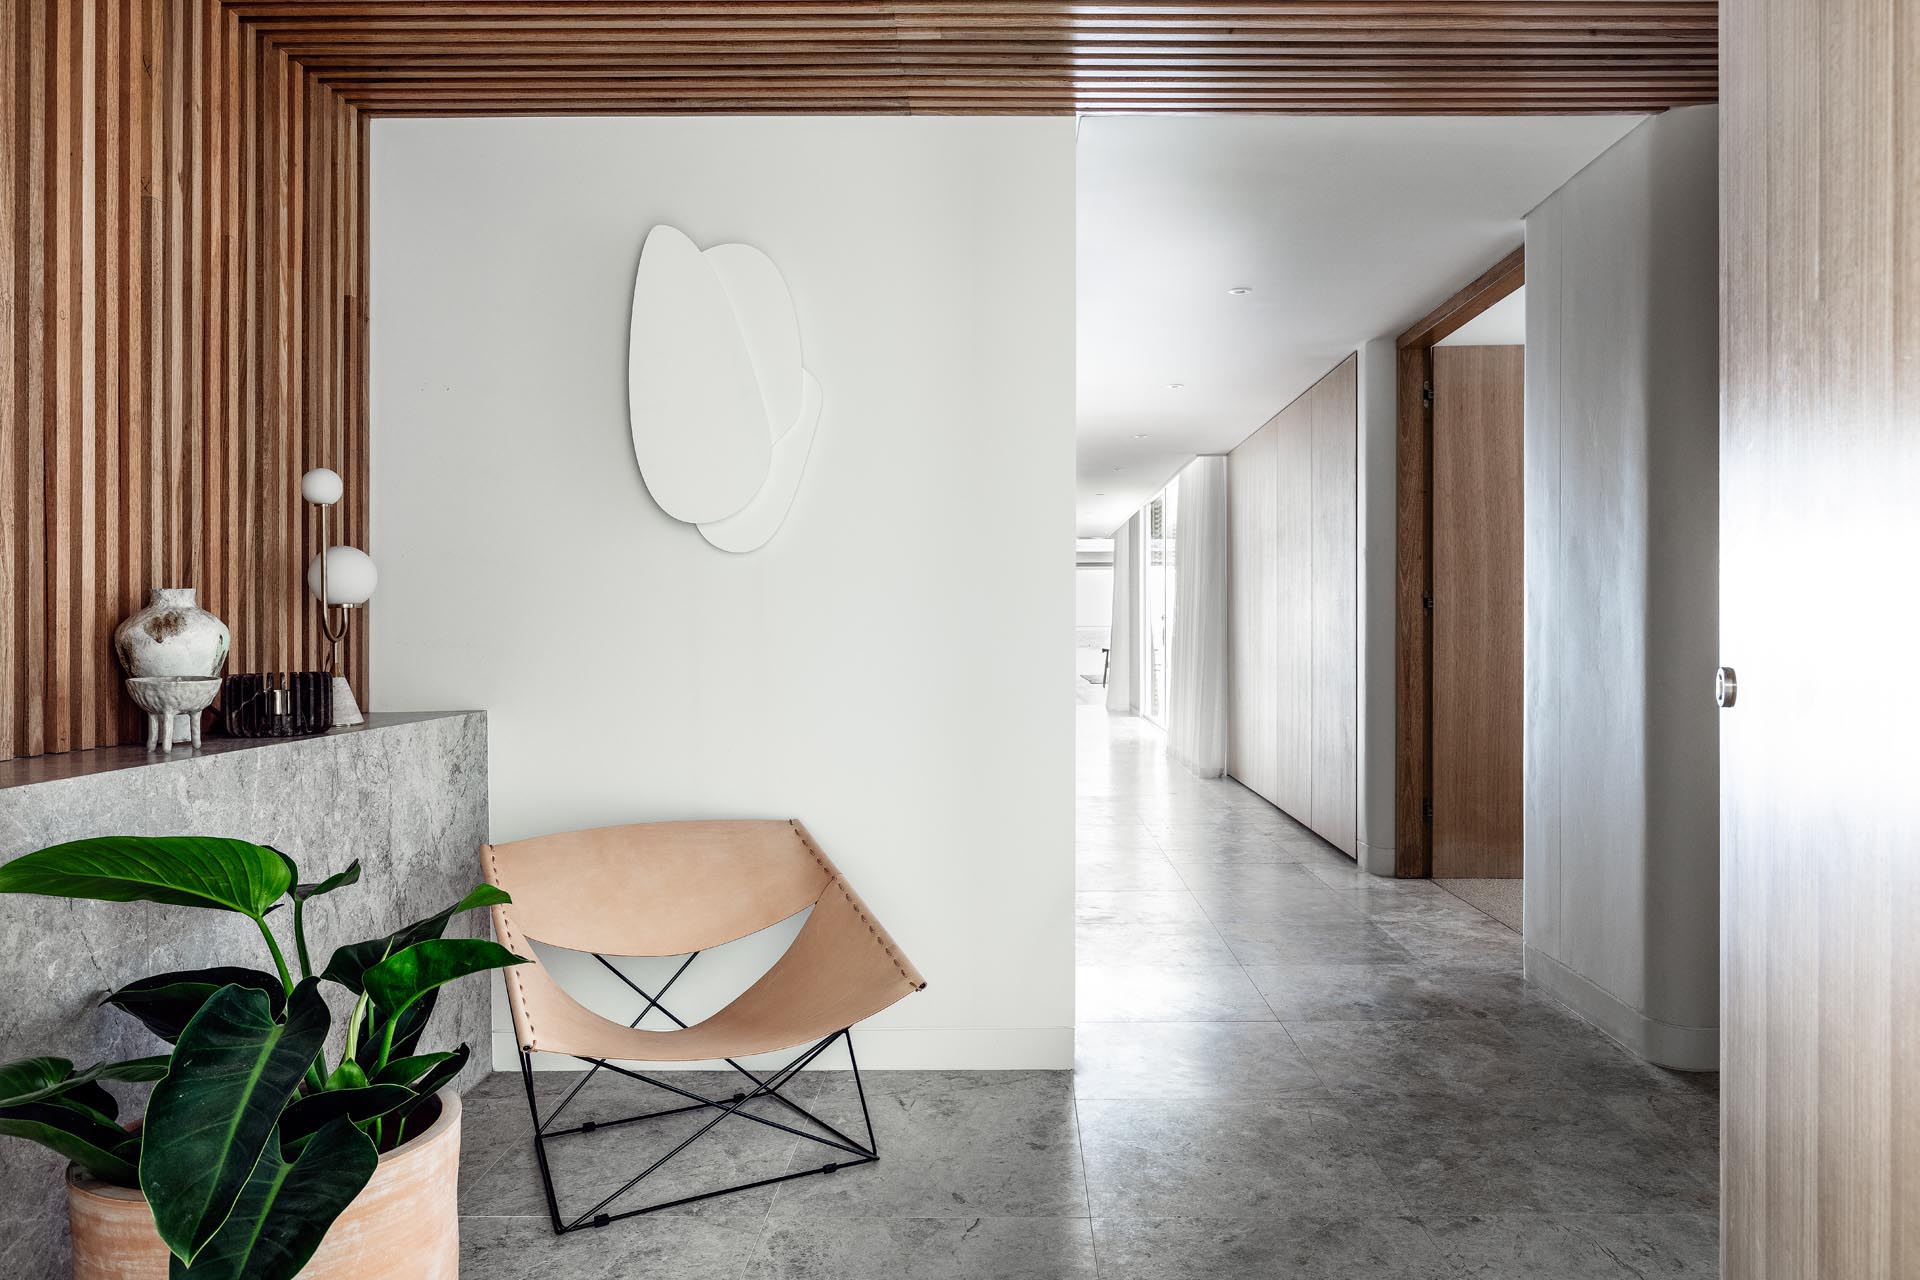 A modern entryway with a leather chair and wood slat wall that flows onto the ceiling.